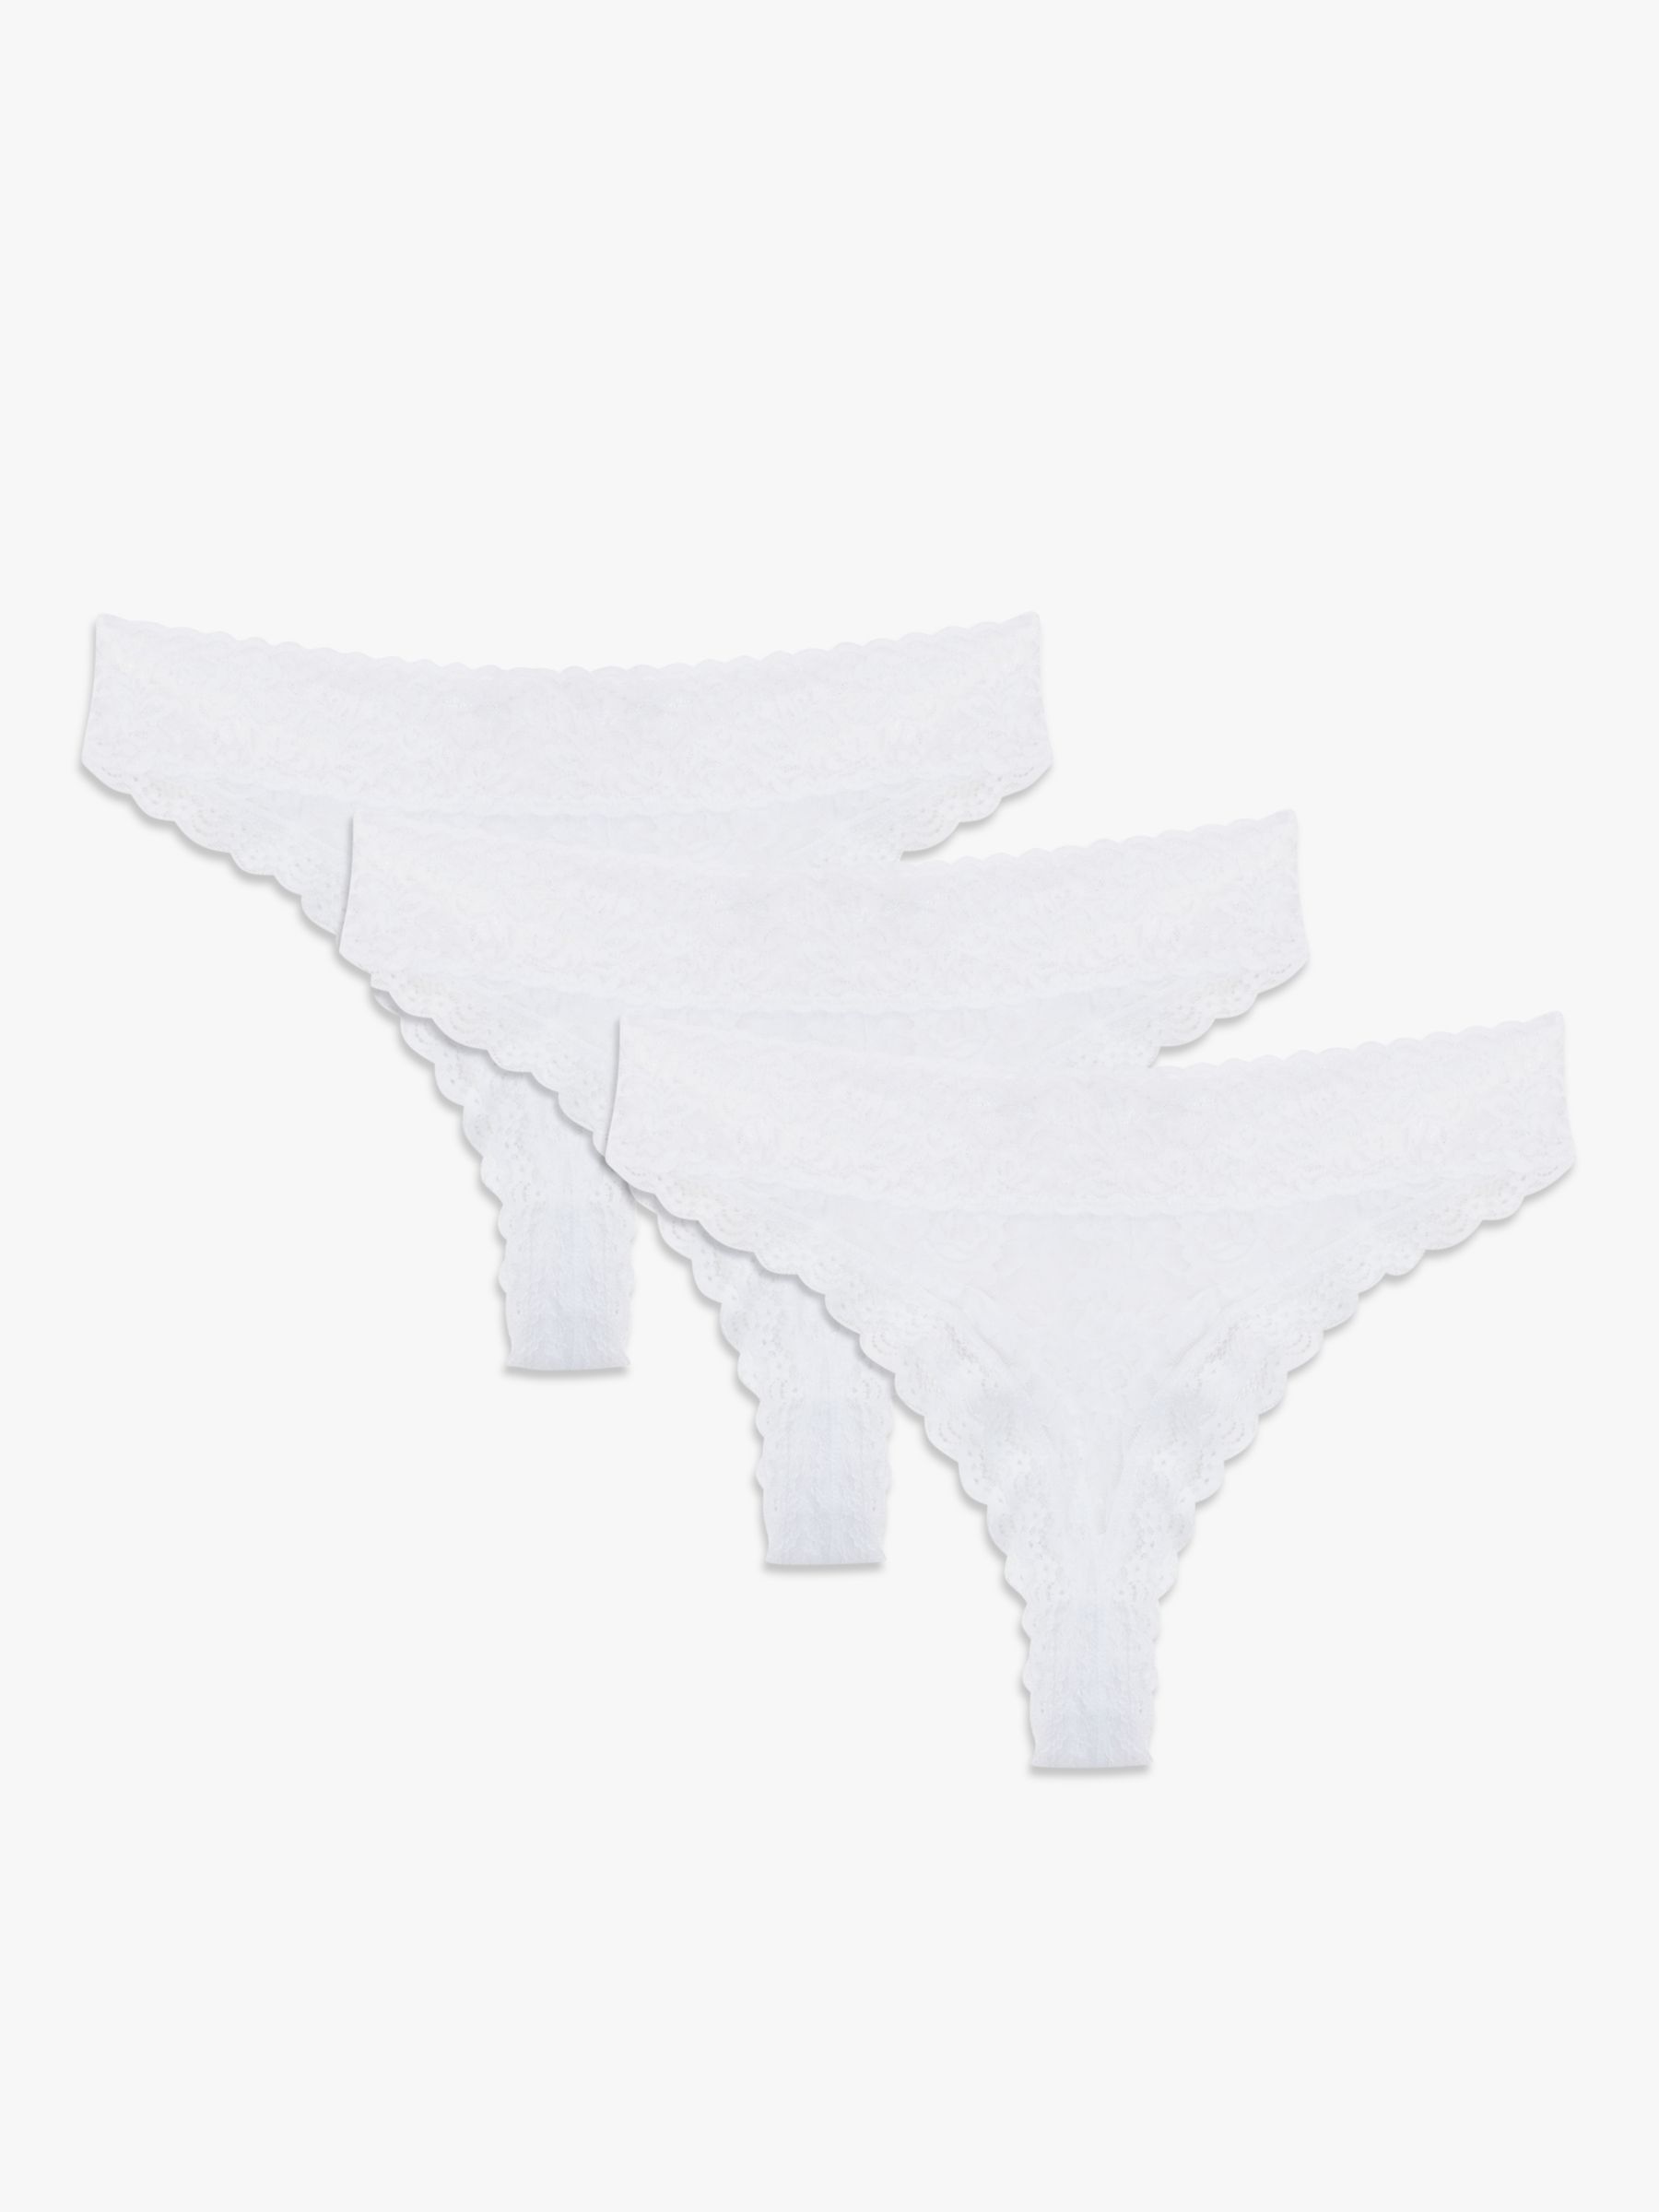 John Lewis ANYDAY Helenca Lace Brazilian Knickers, Pack of 3